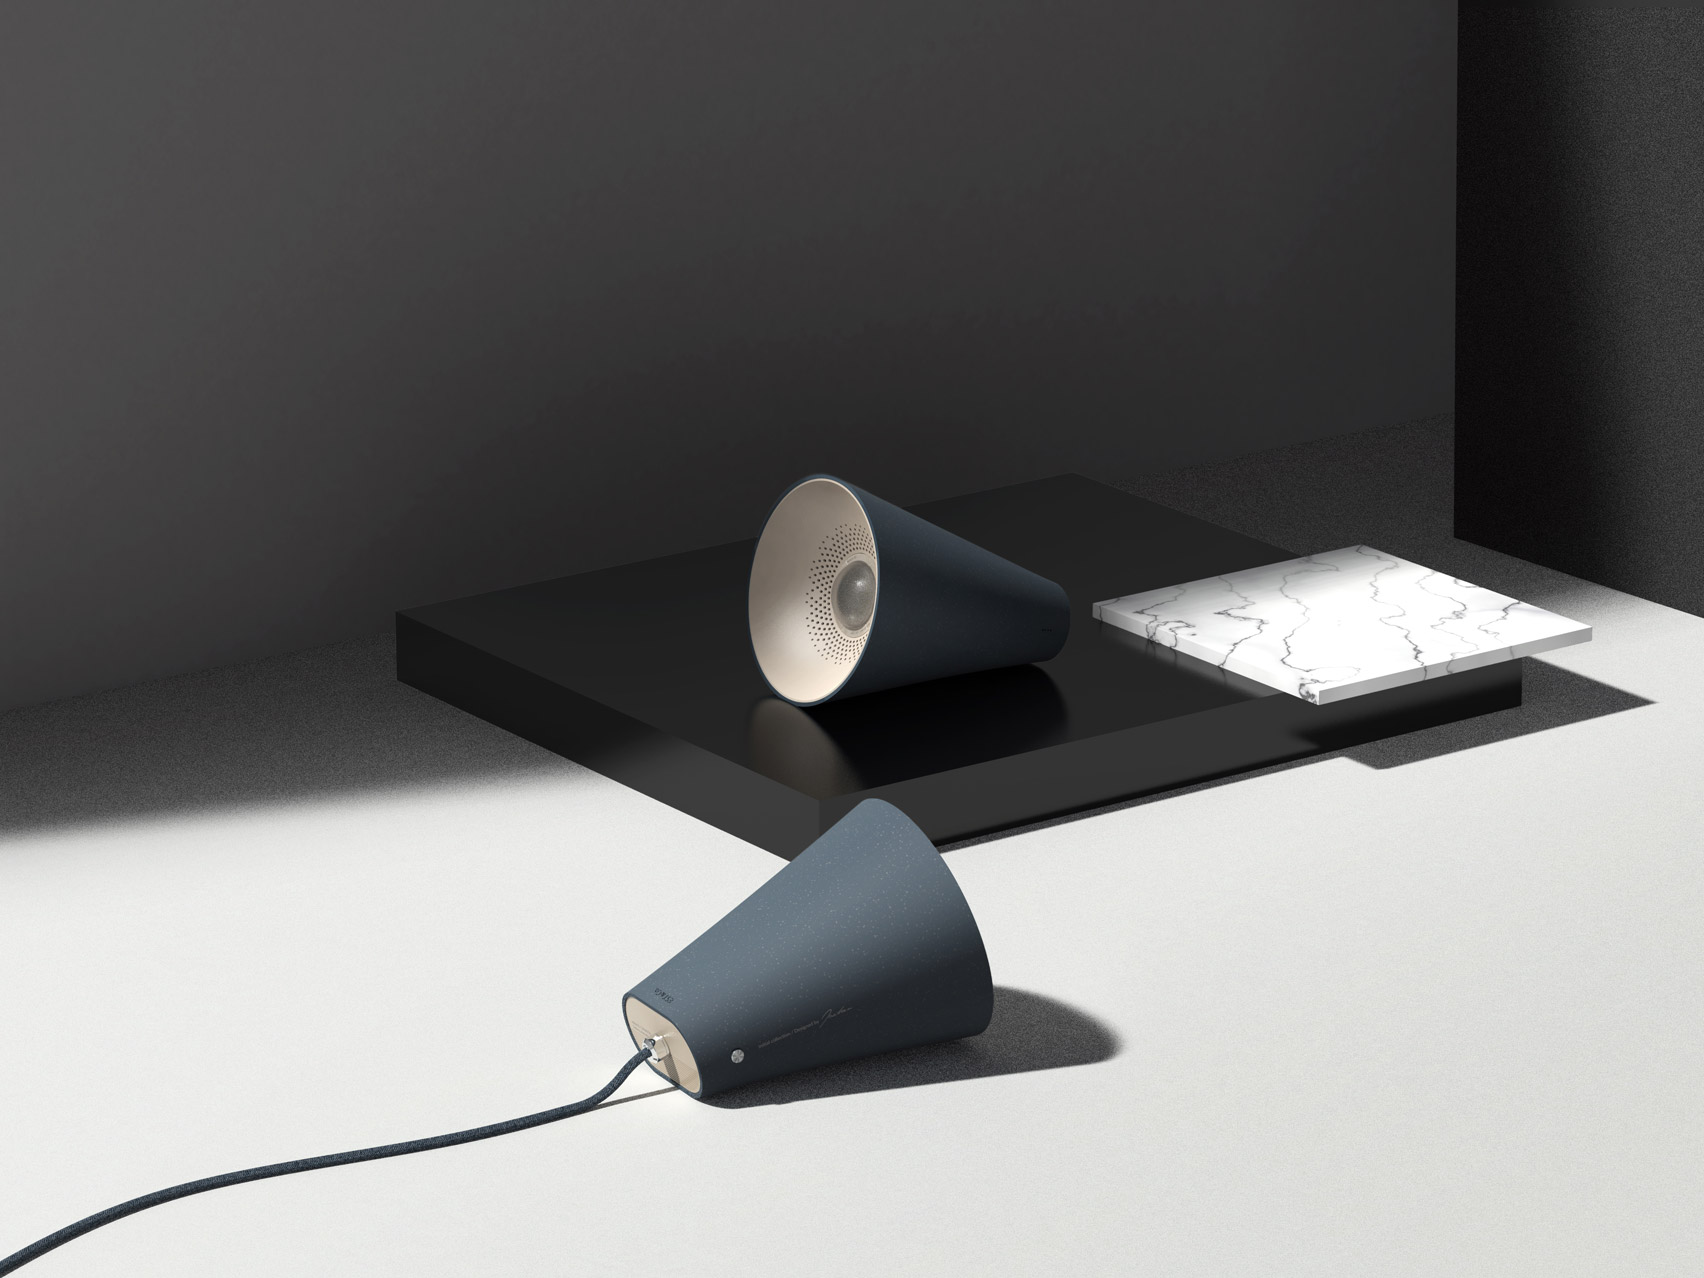 The 01 lamp by UNSW Sydney student Jiachen Liu